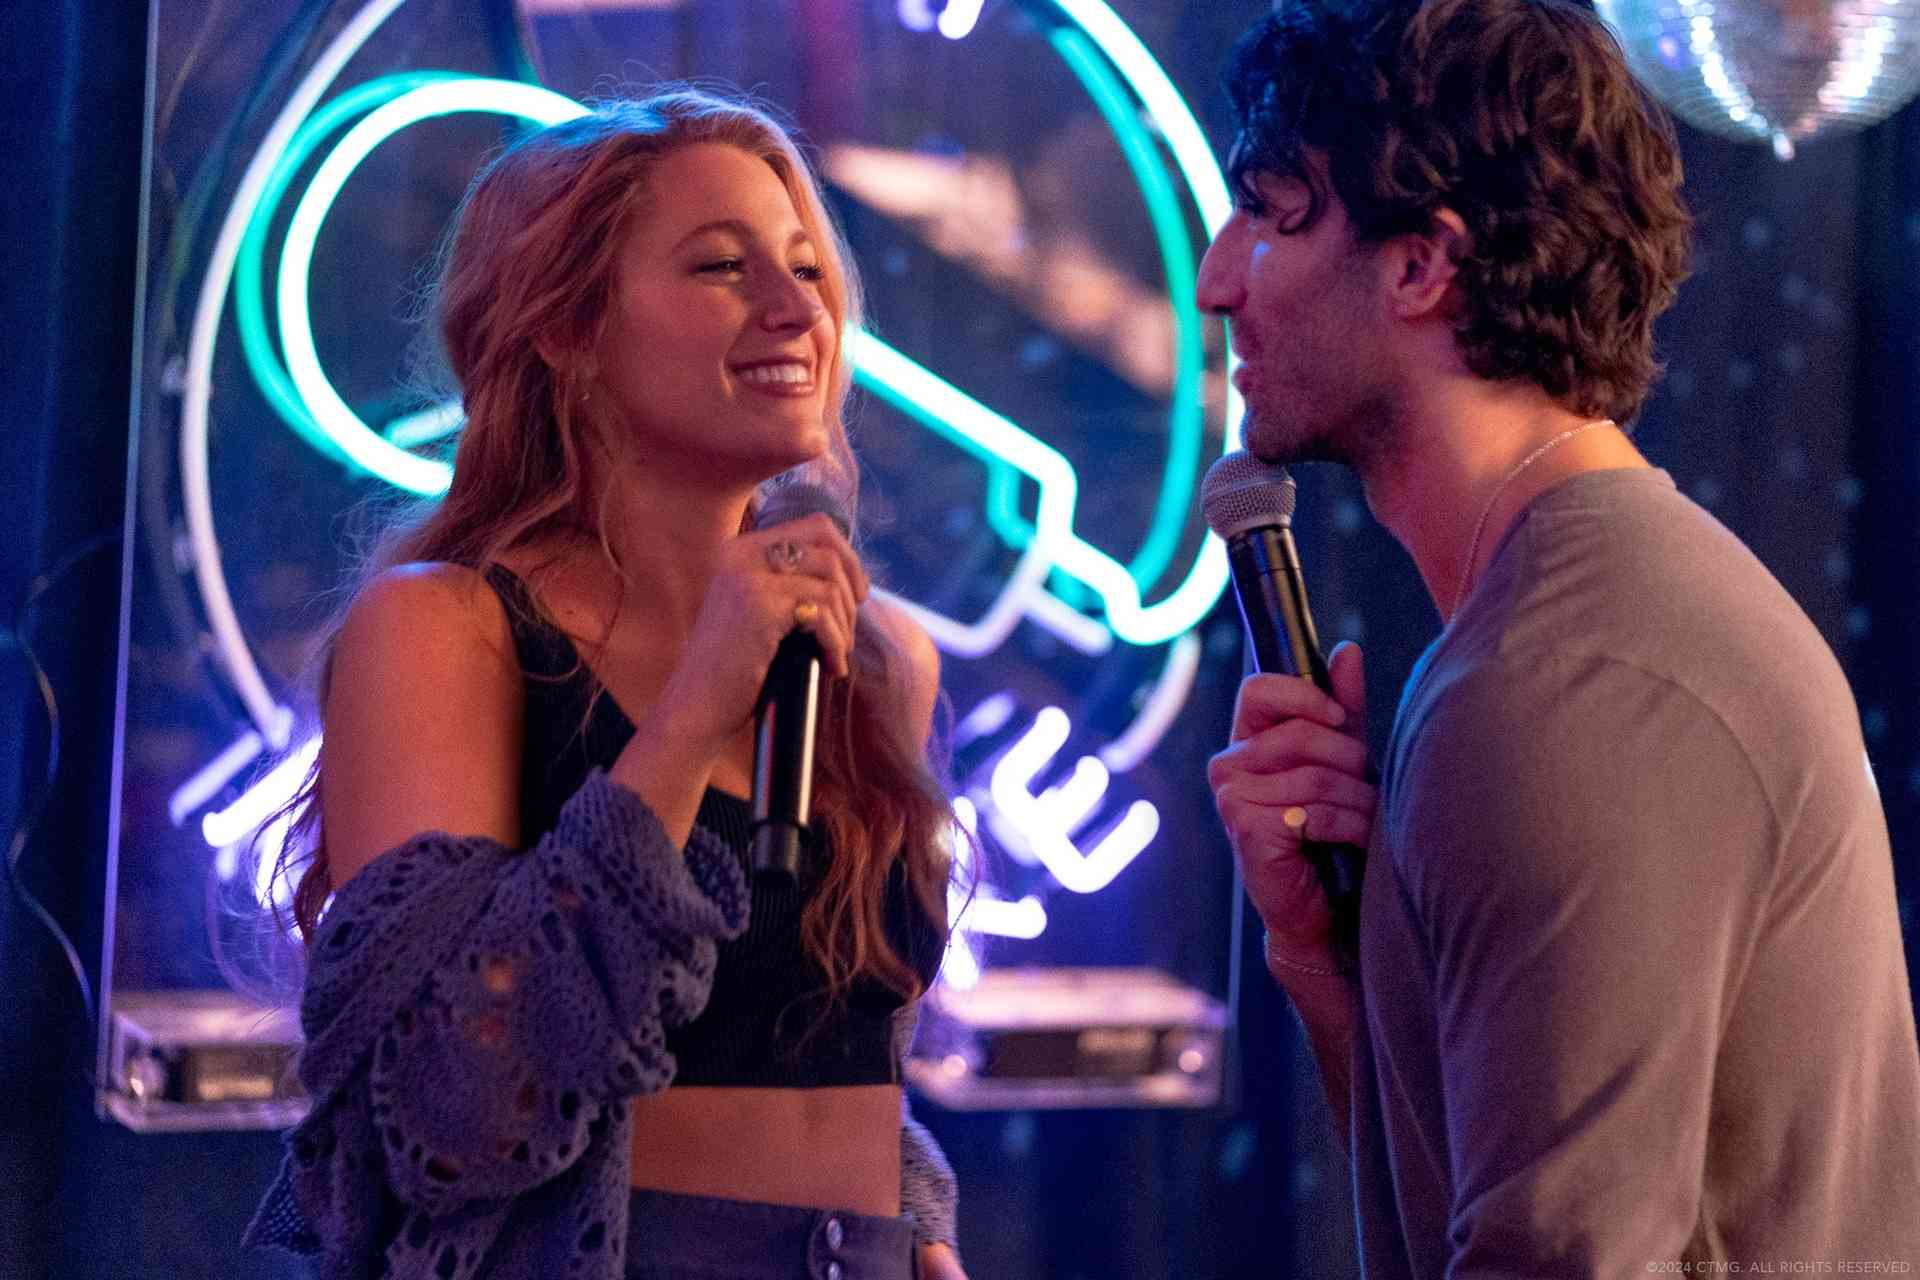 WATCH: "It Ends With Us" drops first trailer featuring Blake Lively, Justin Baldoni